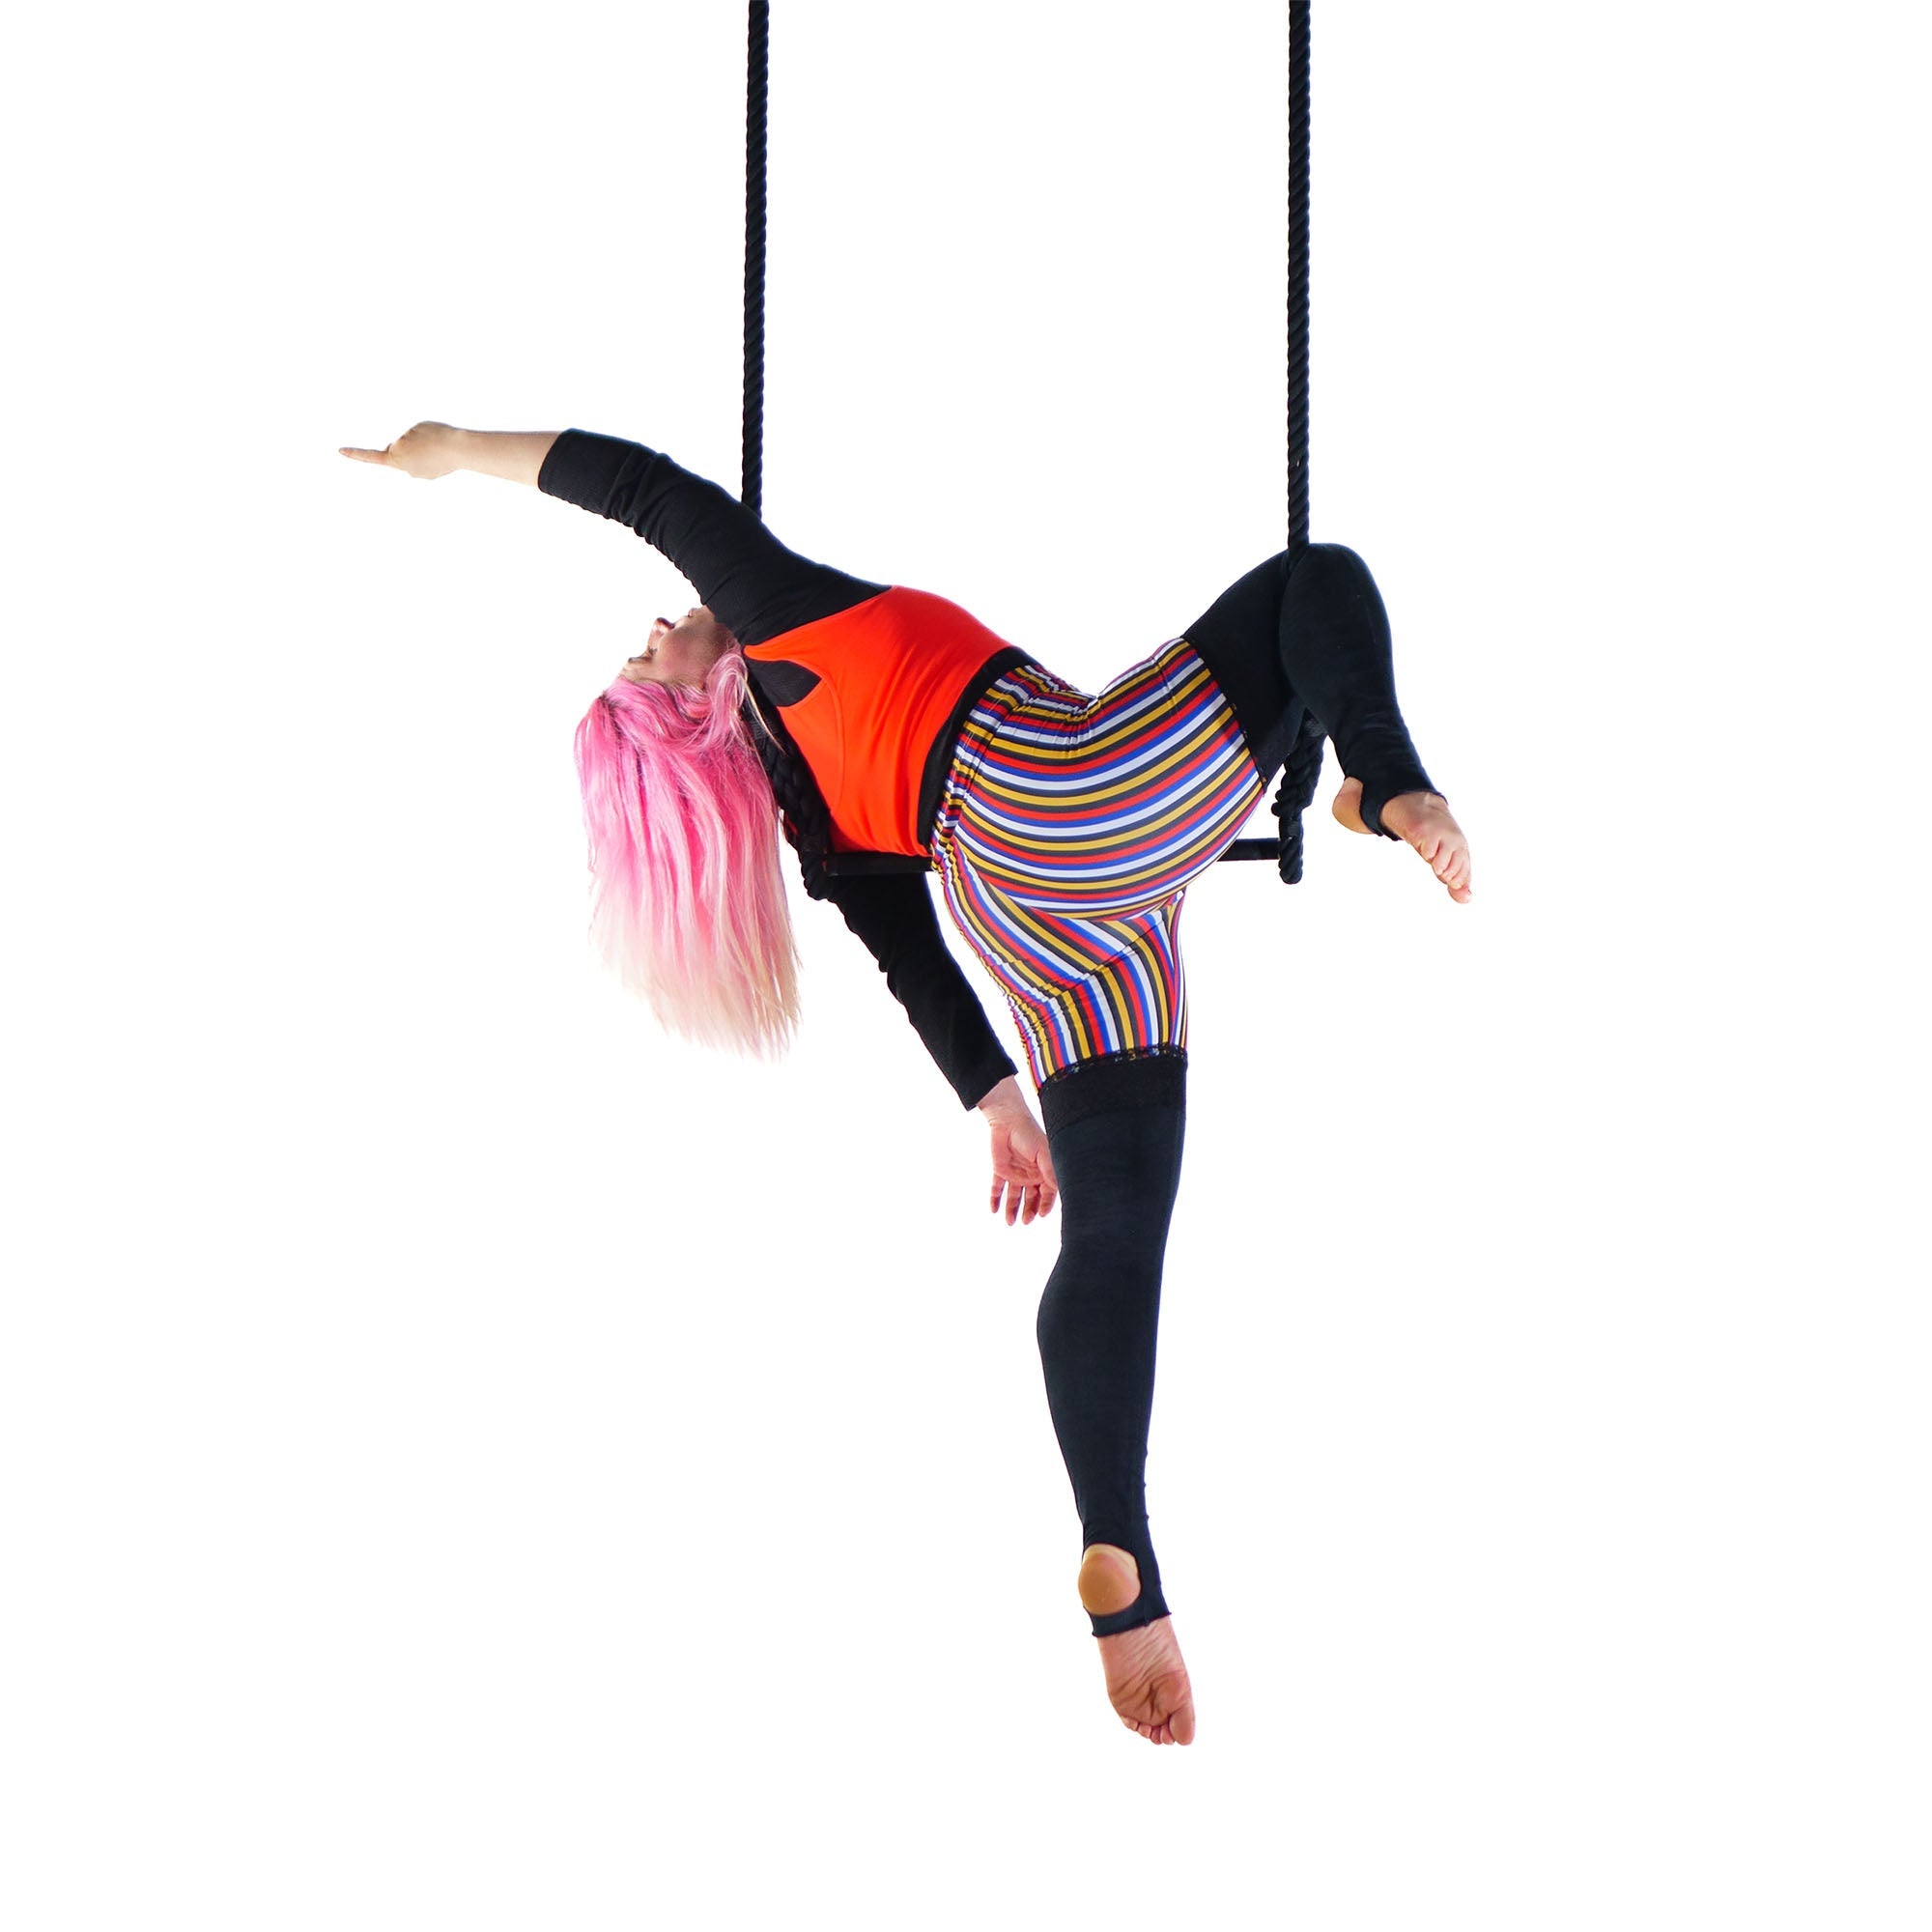 performer on classic trapeze